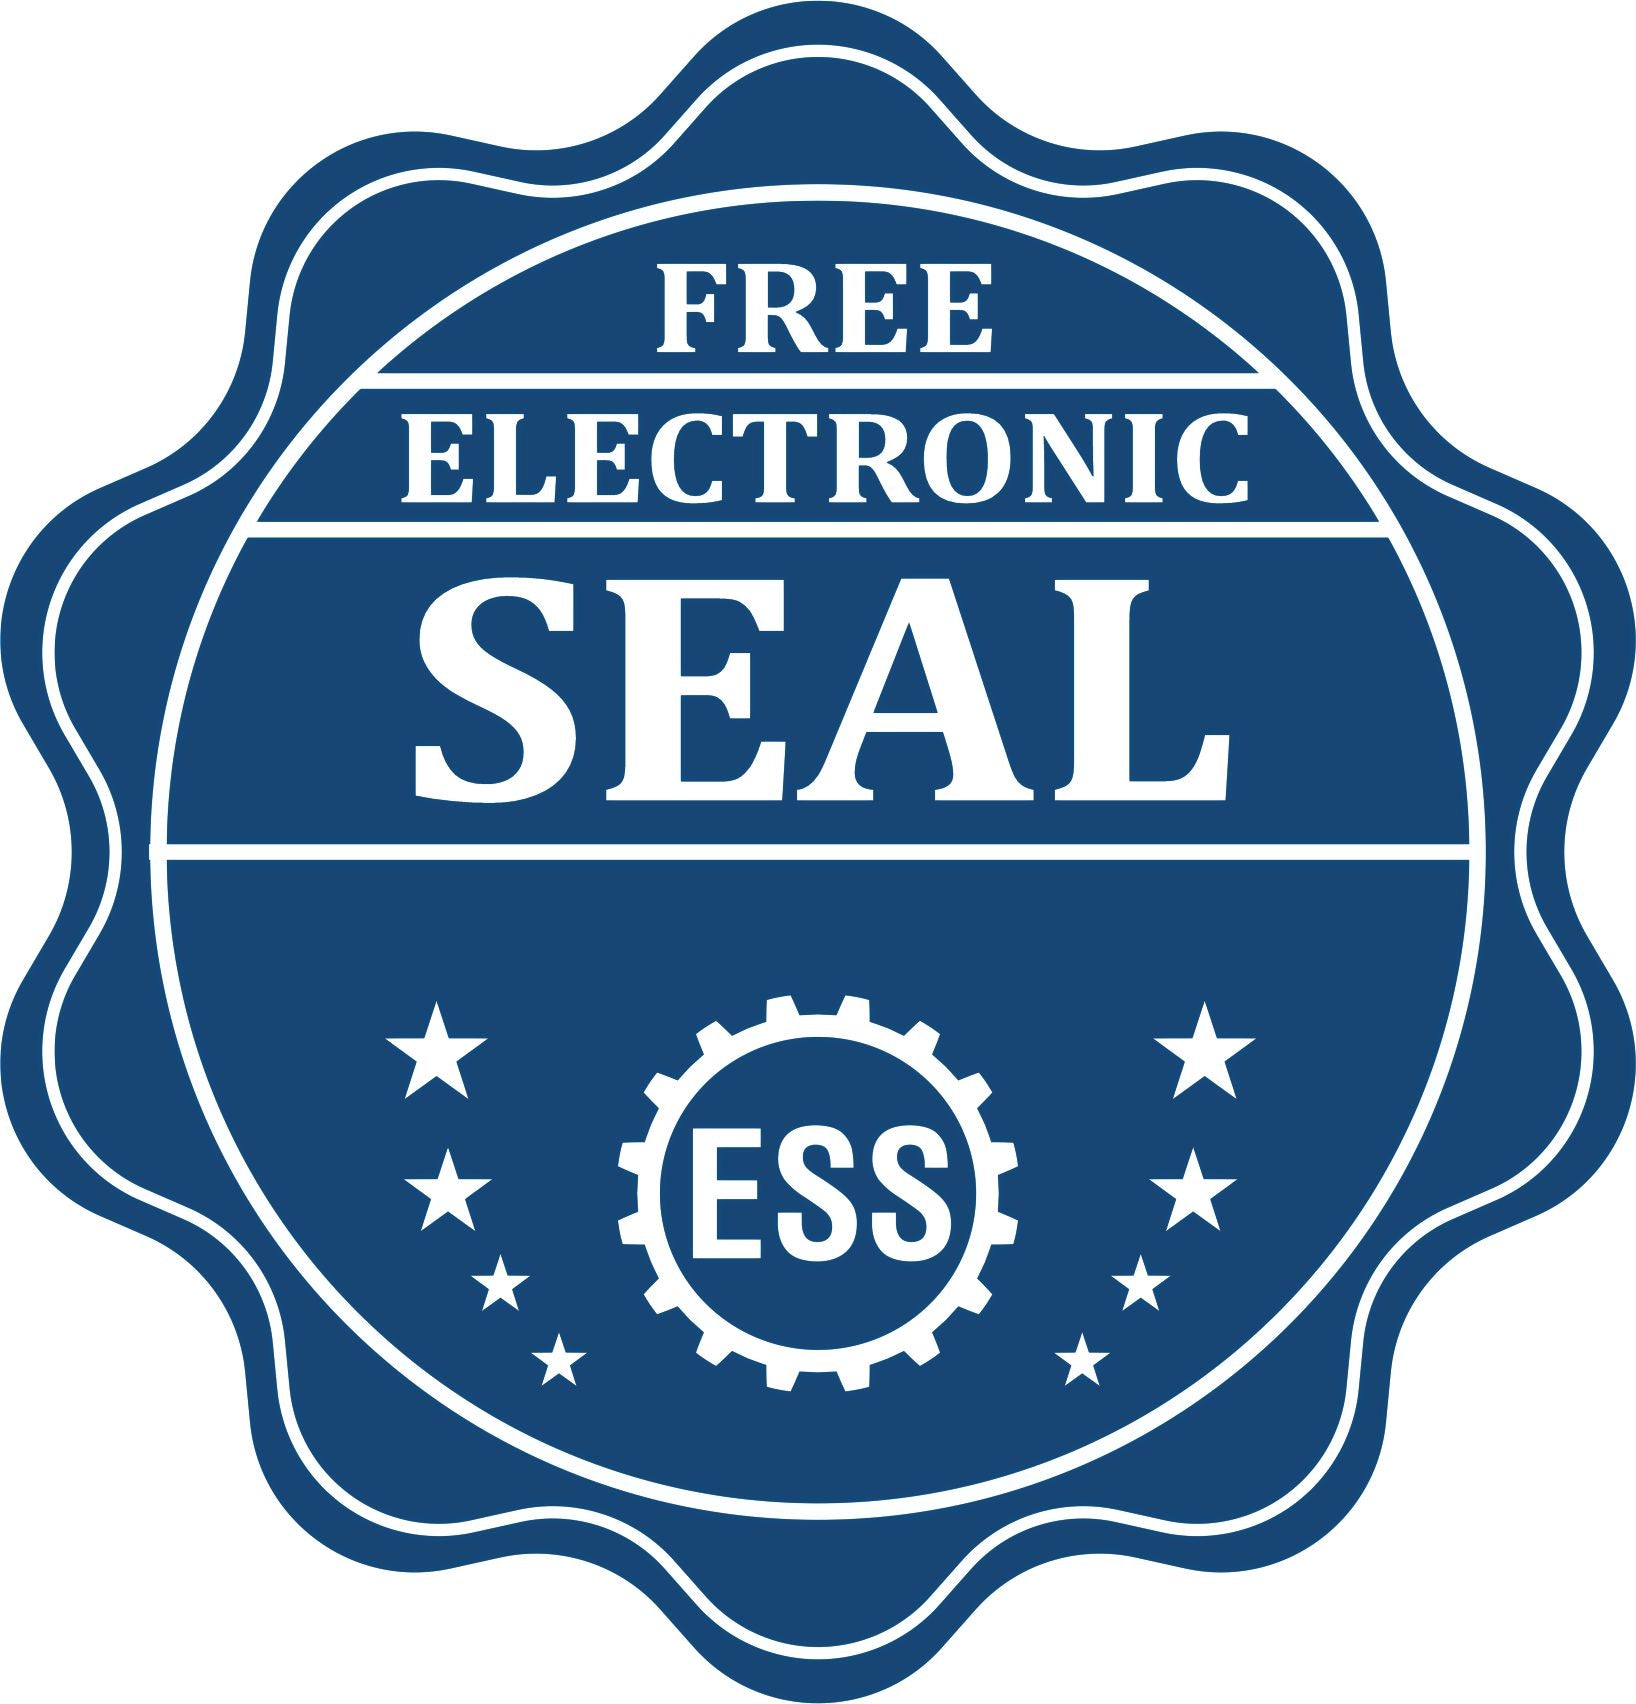 A badge showing a free electronic seal for the Gift New York Engineer Seal with stars and the ESS gear on the emblem.